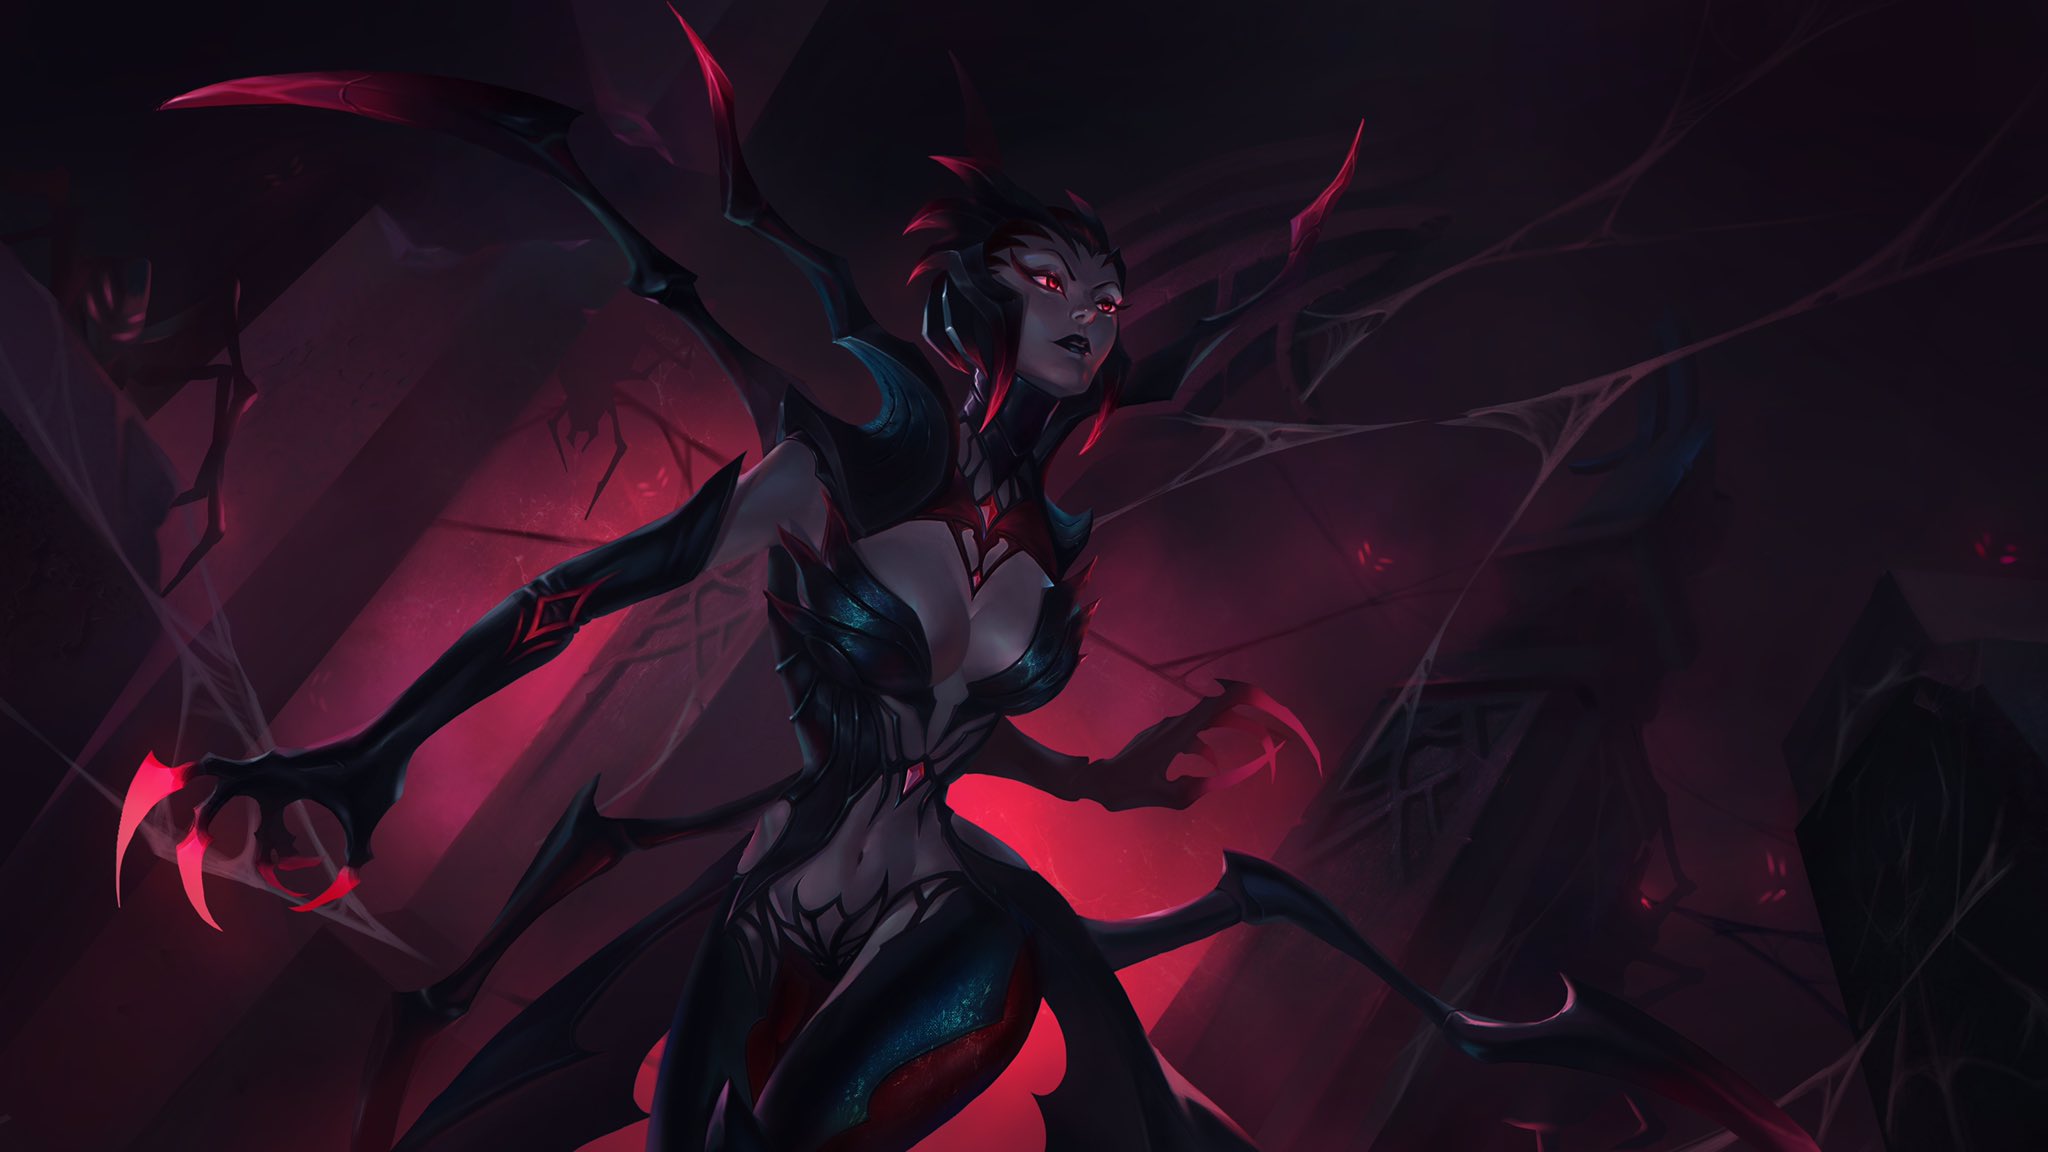 League of Legends Elise wallpaper Resolution 2048x1152 | Best Download this awesome wallpaper - Cool Wallpaper HD - CoolWallpaper-HD.com